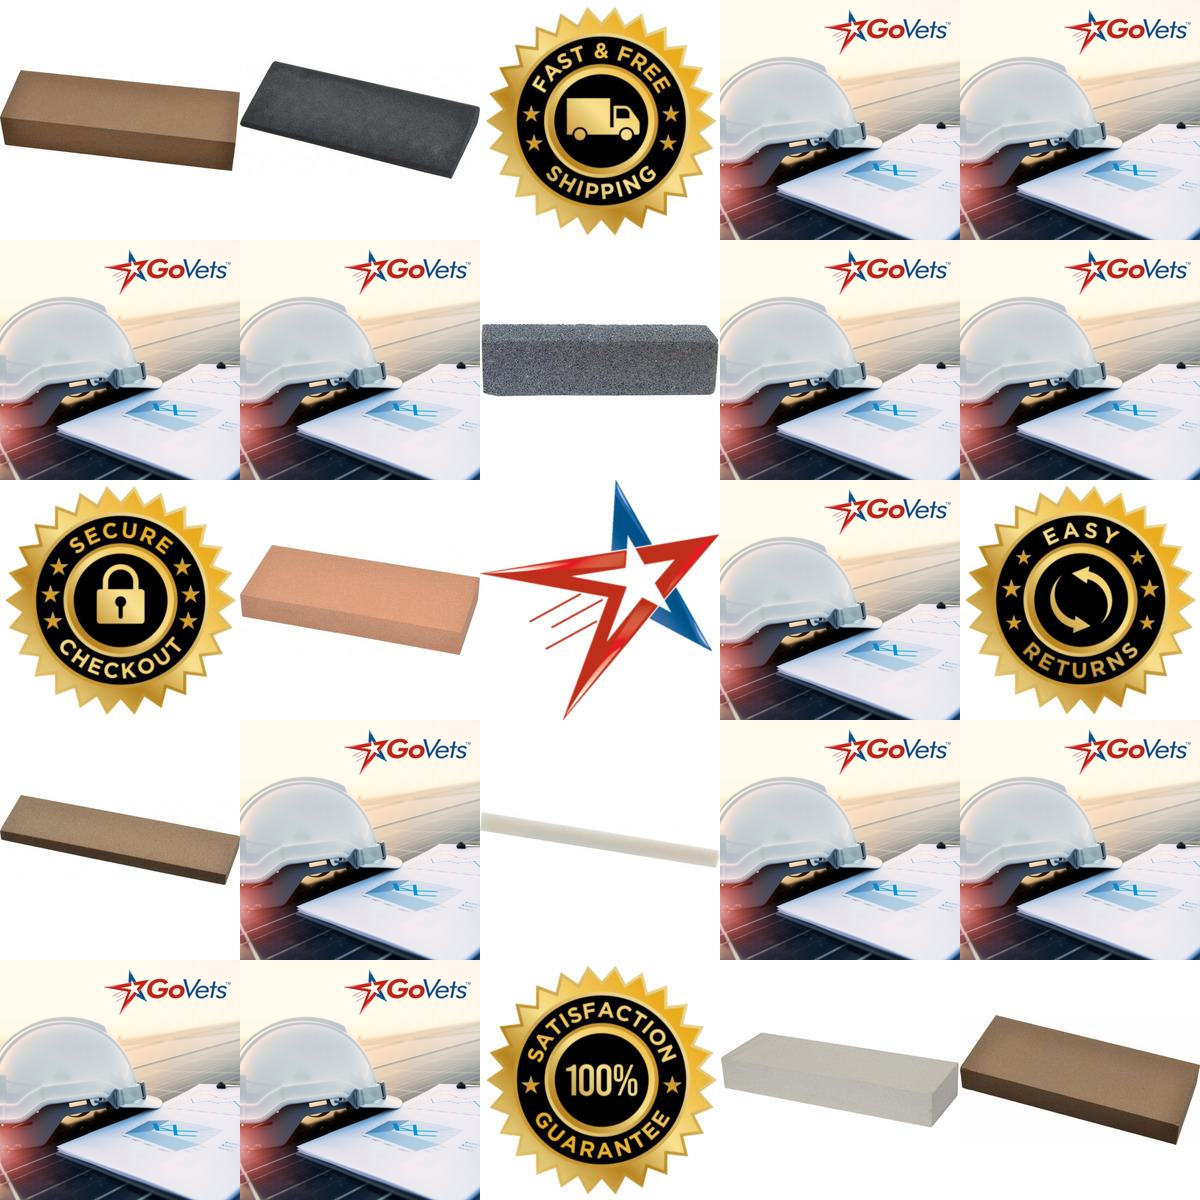 A selection of Sharpening Stones products on GoVets